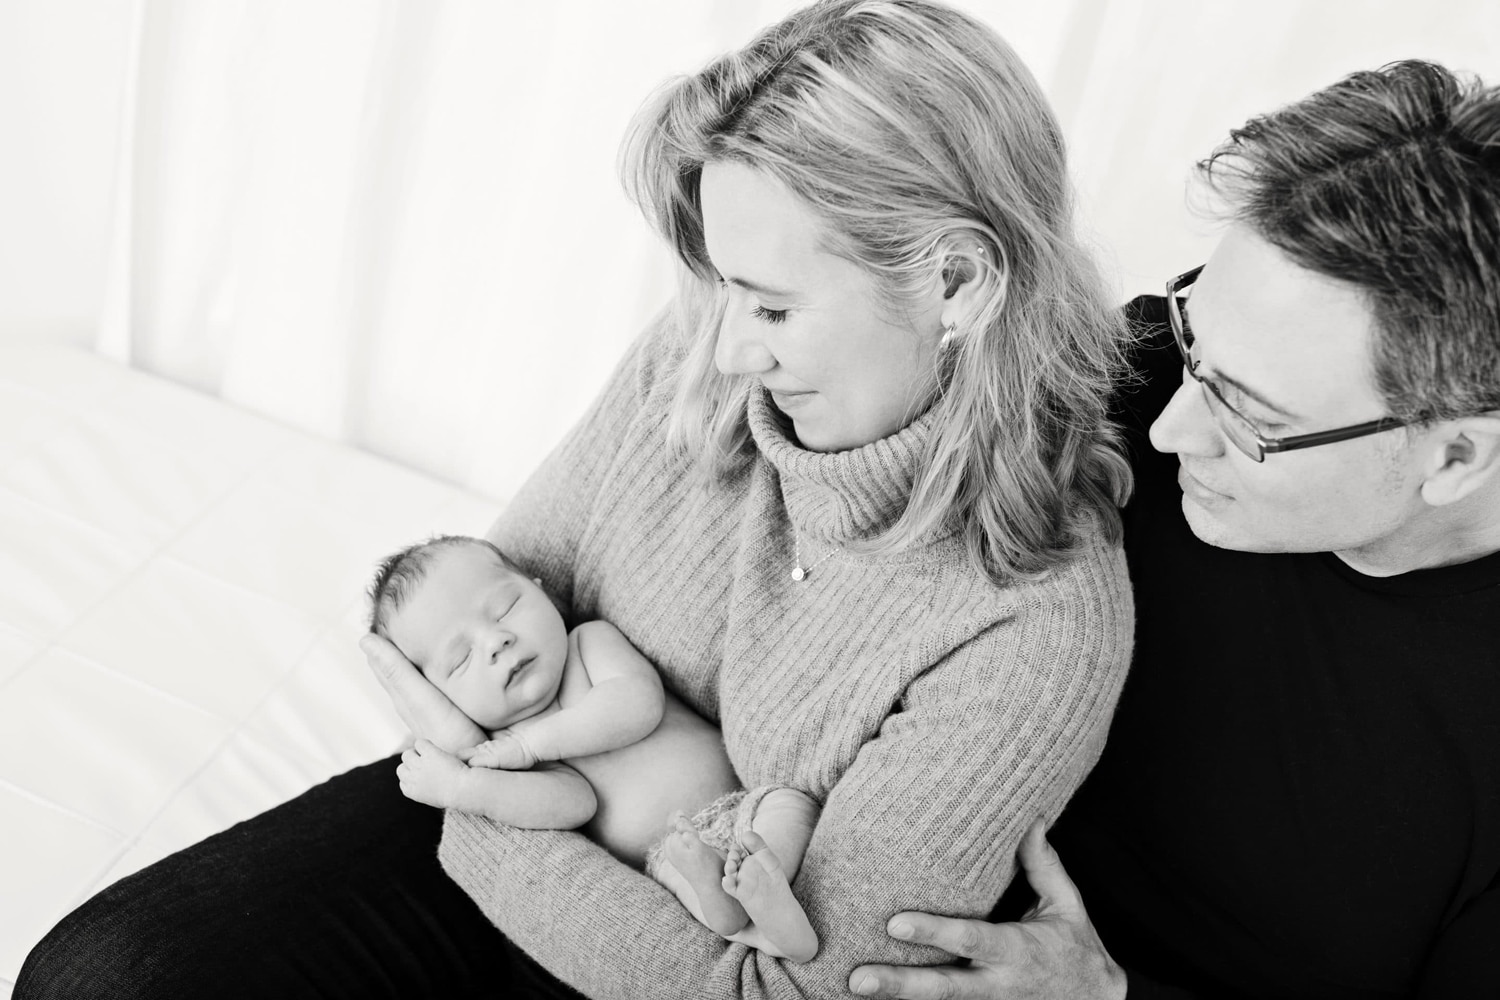 Black & white photo of parents holding their new baby via surrogacy.